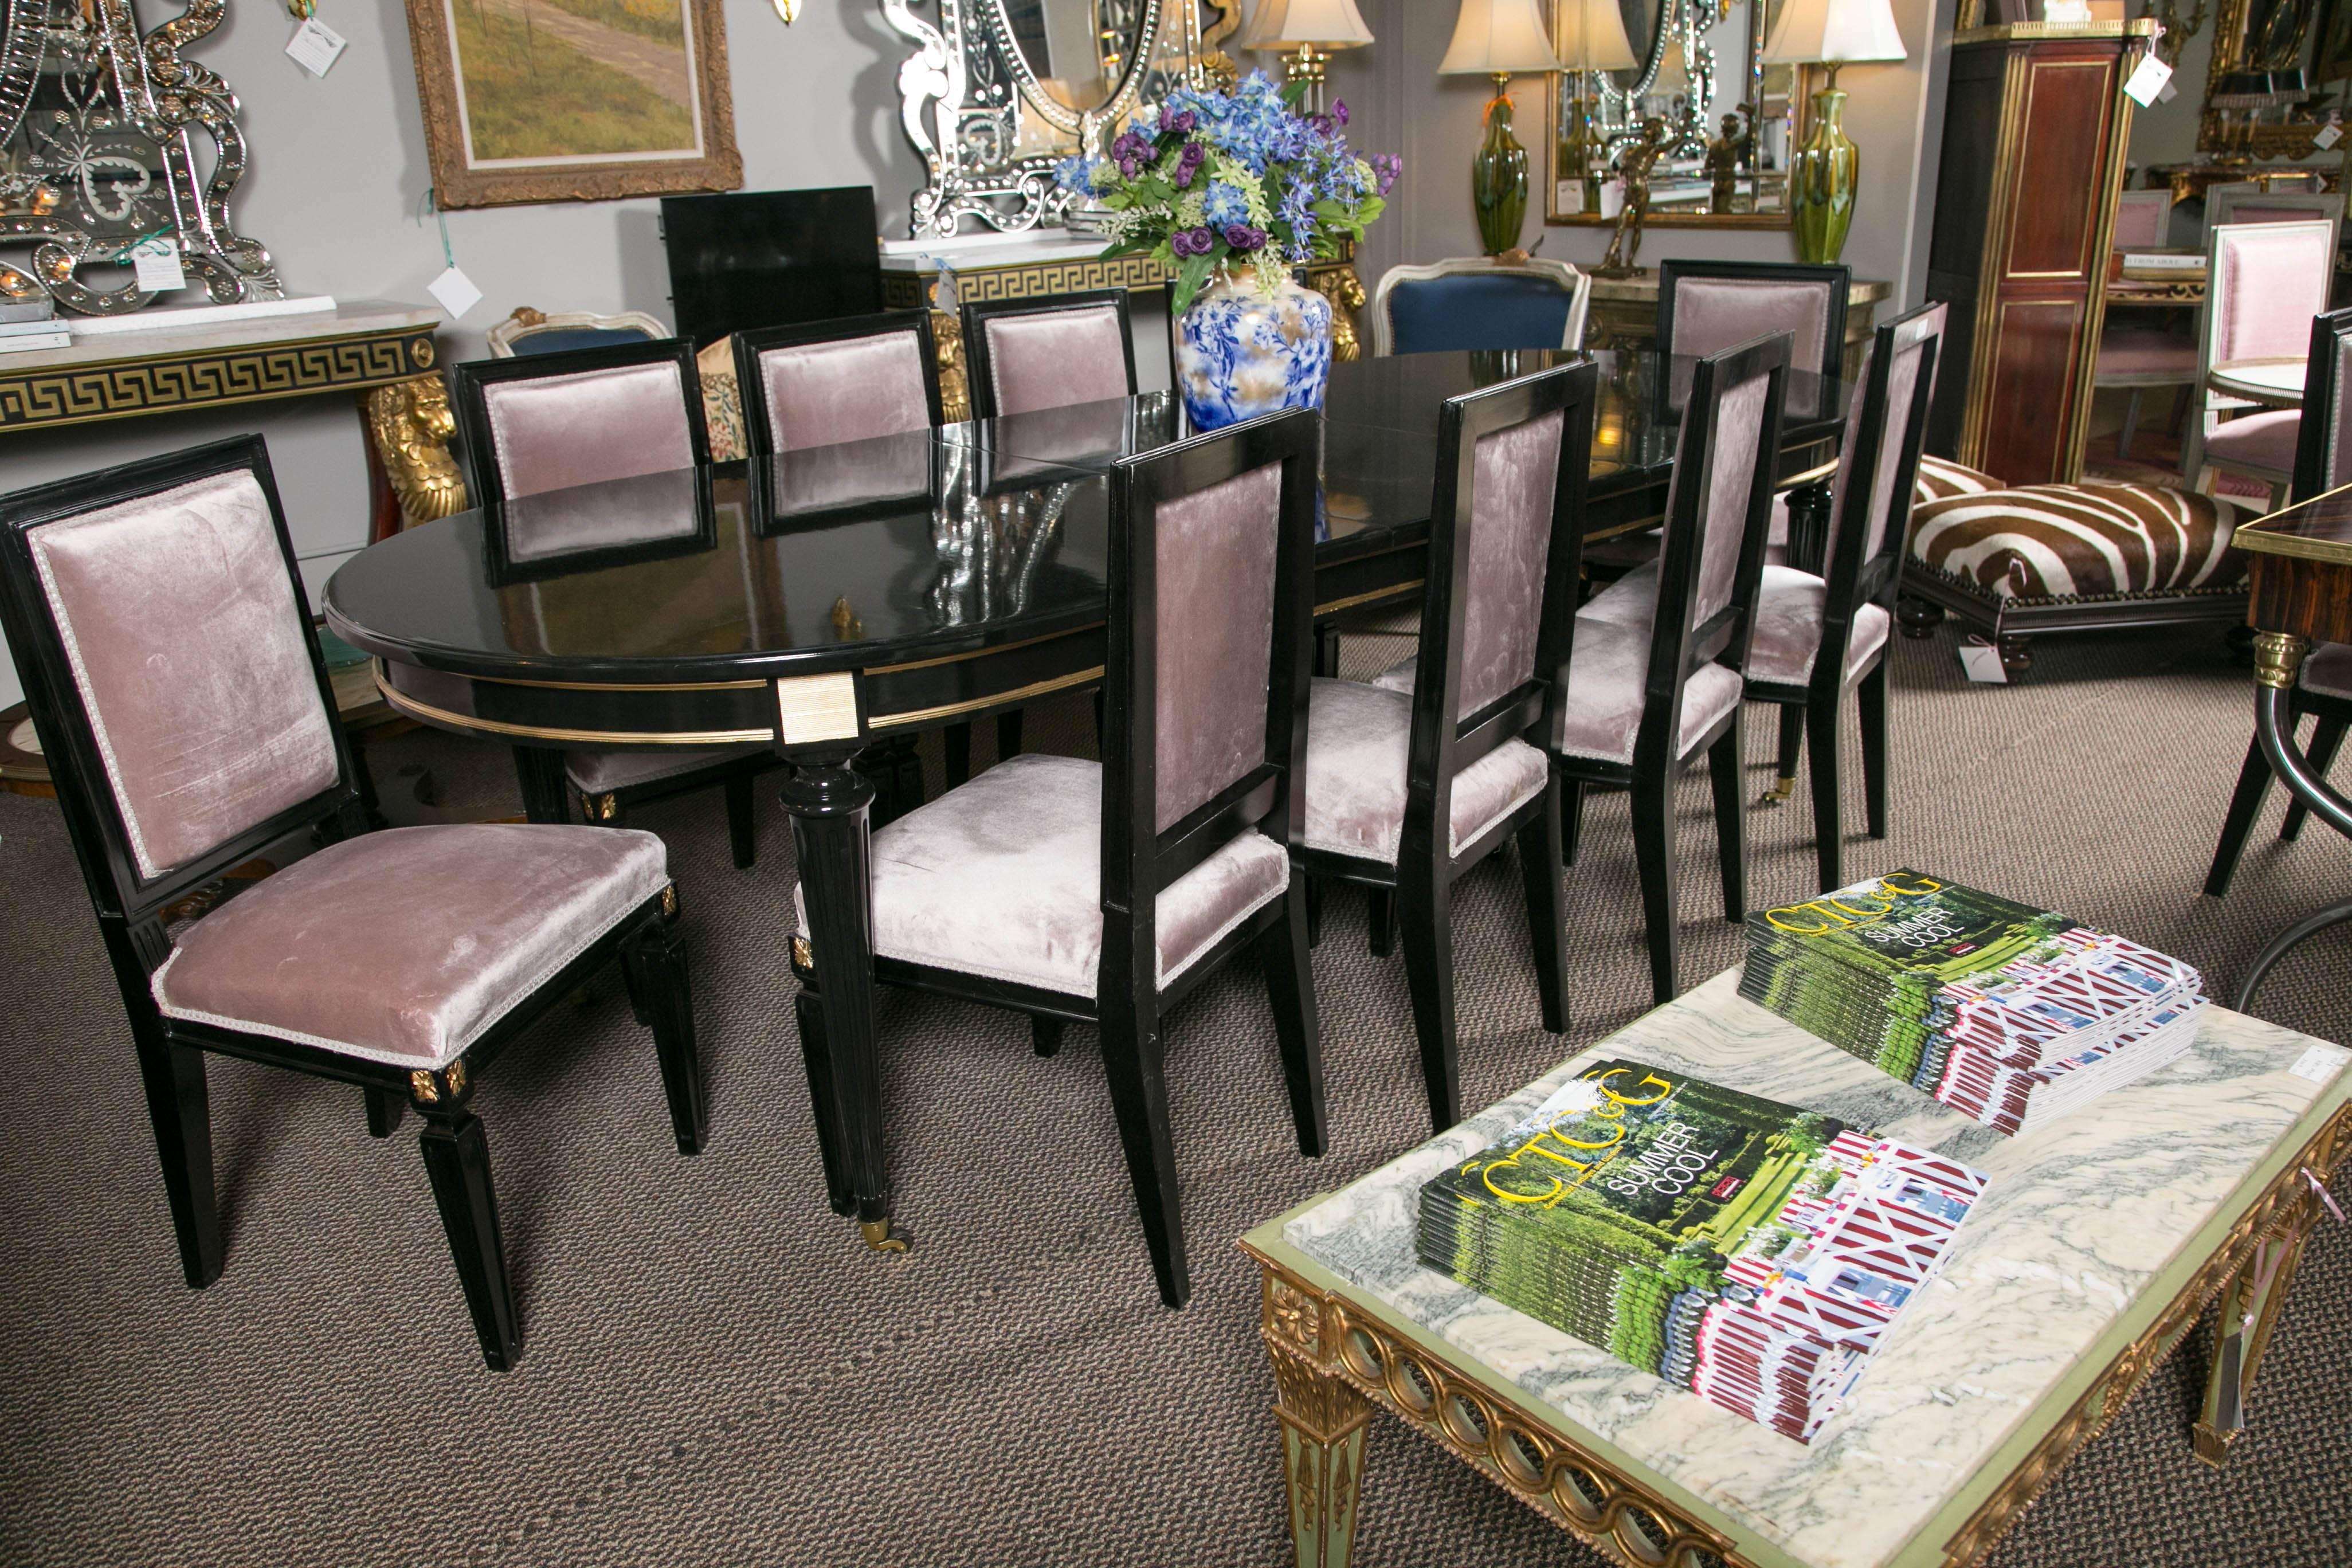 A set of recently upholstered dining chairs in the style of Maison Jansen. This set shows Hollywood Regency at its finest. No details were left undone in making this one of a kind set of ebonized chairs. 12 in all, you may purchase as many as you